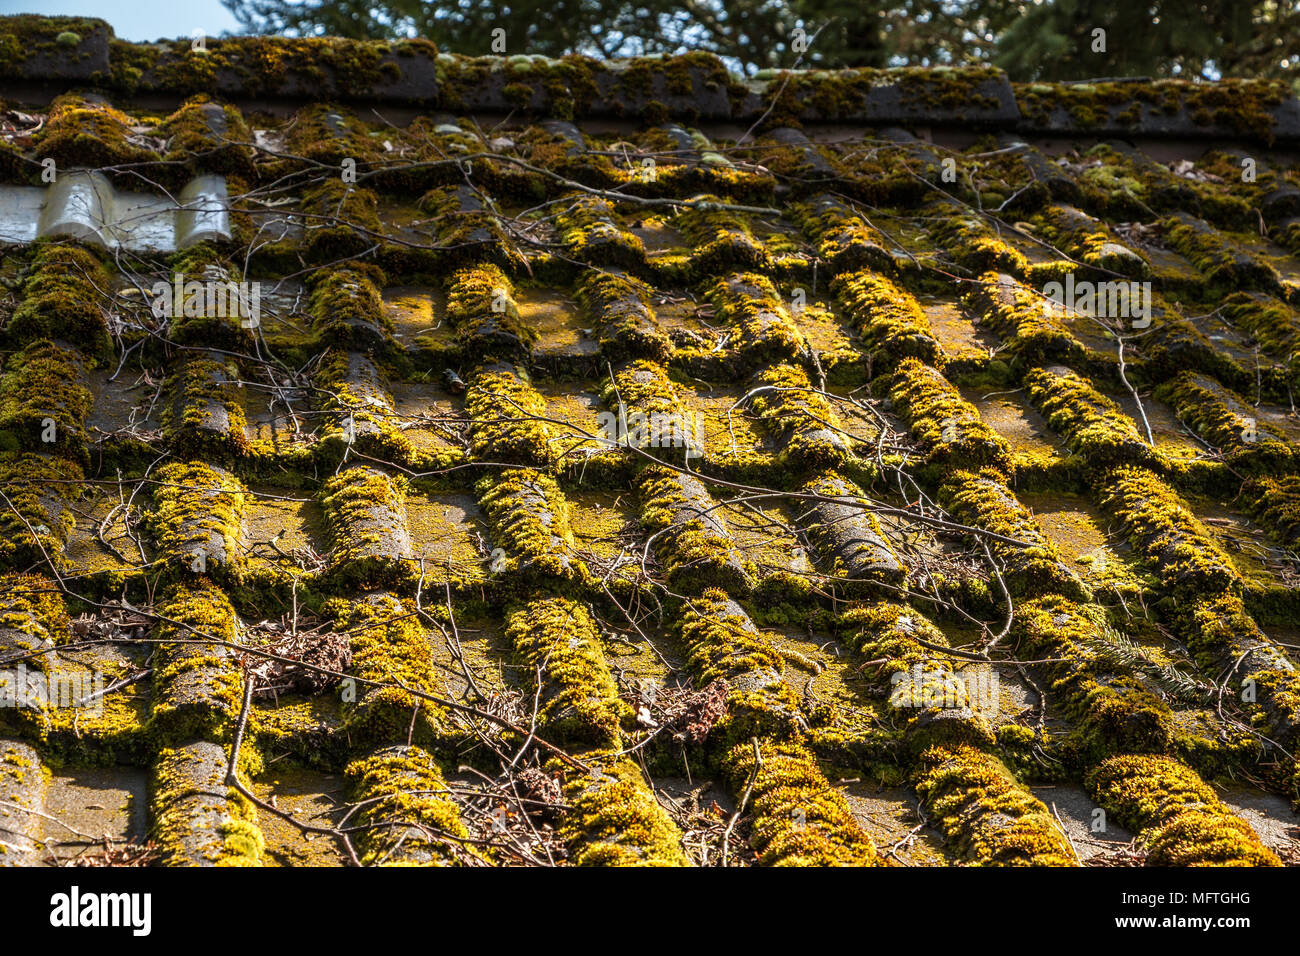 Mossy roof of a hovel in the garden Stock Photo